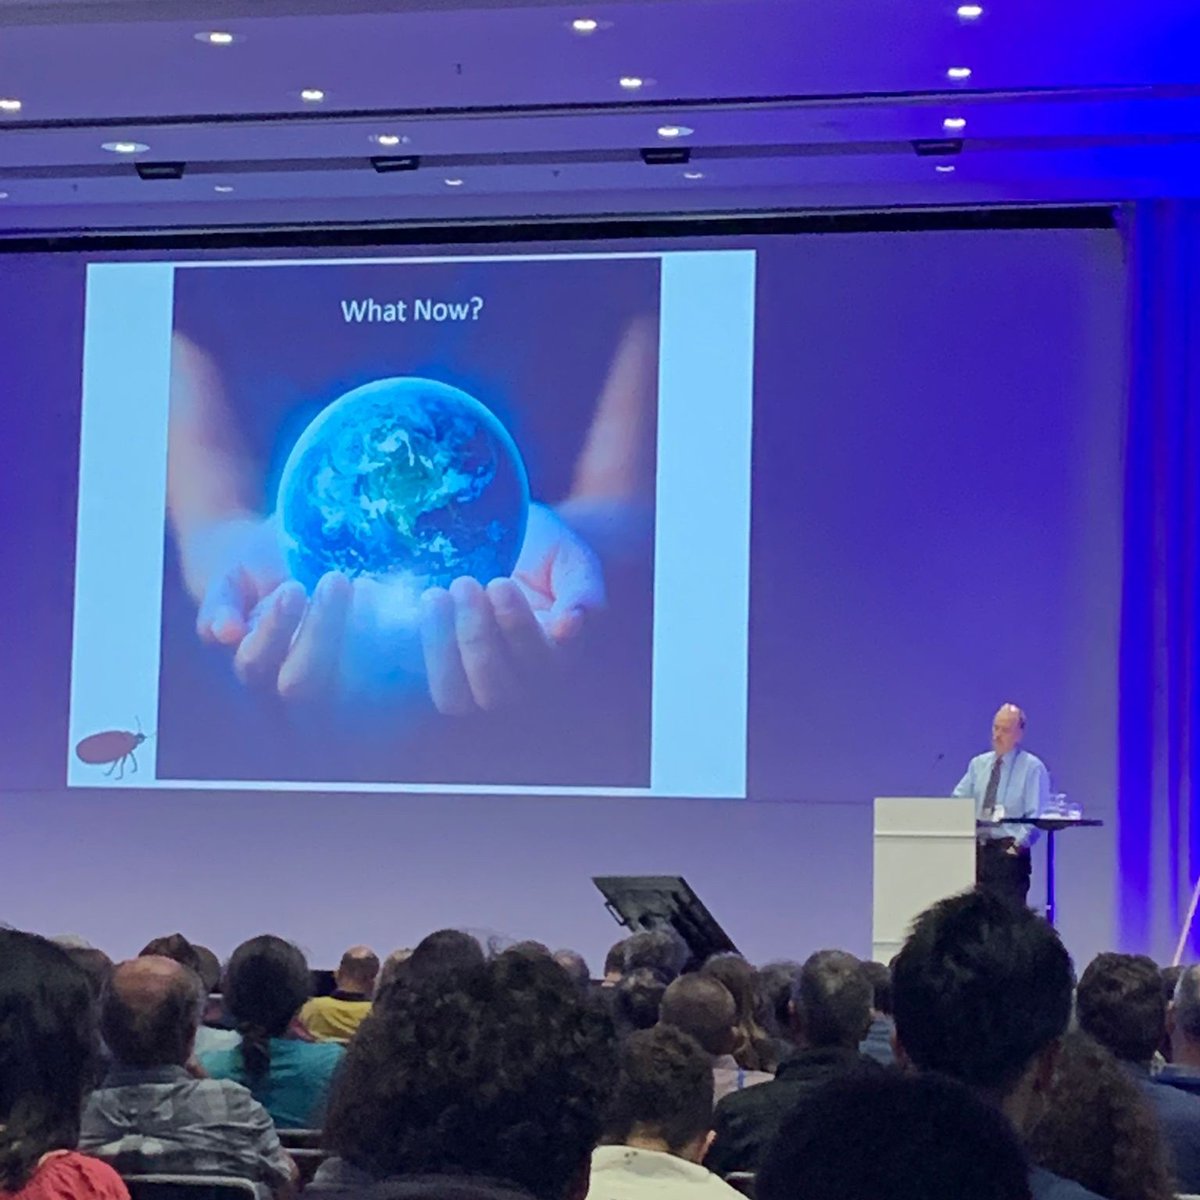 Plenary speaker David Wagner, @UConn University of Connecticut - #Insect #Decline in the #Anthropocene: Death by a Thousand Cuts

#ICE2022 #Helsinki #Finland #Science #Entomology #Ento22 #RESfuture https://t.co/PZ35WQe1gH